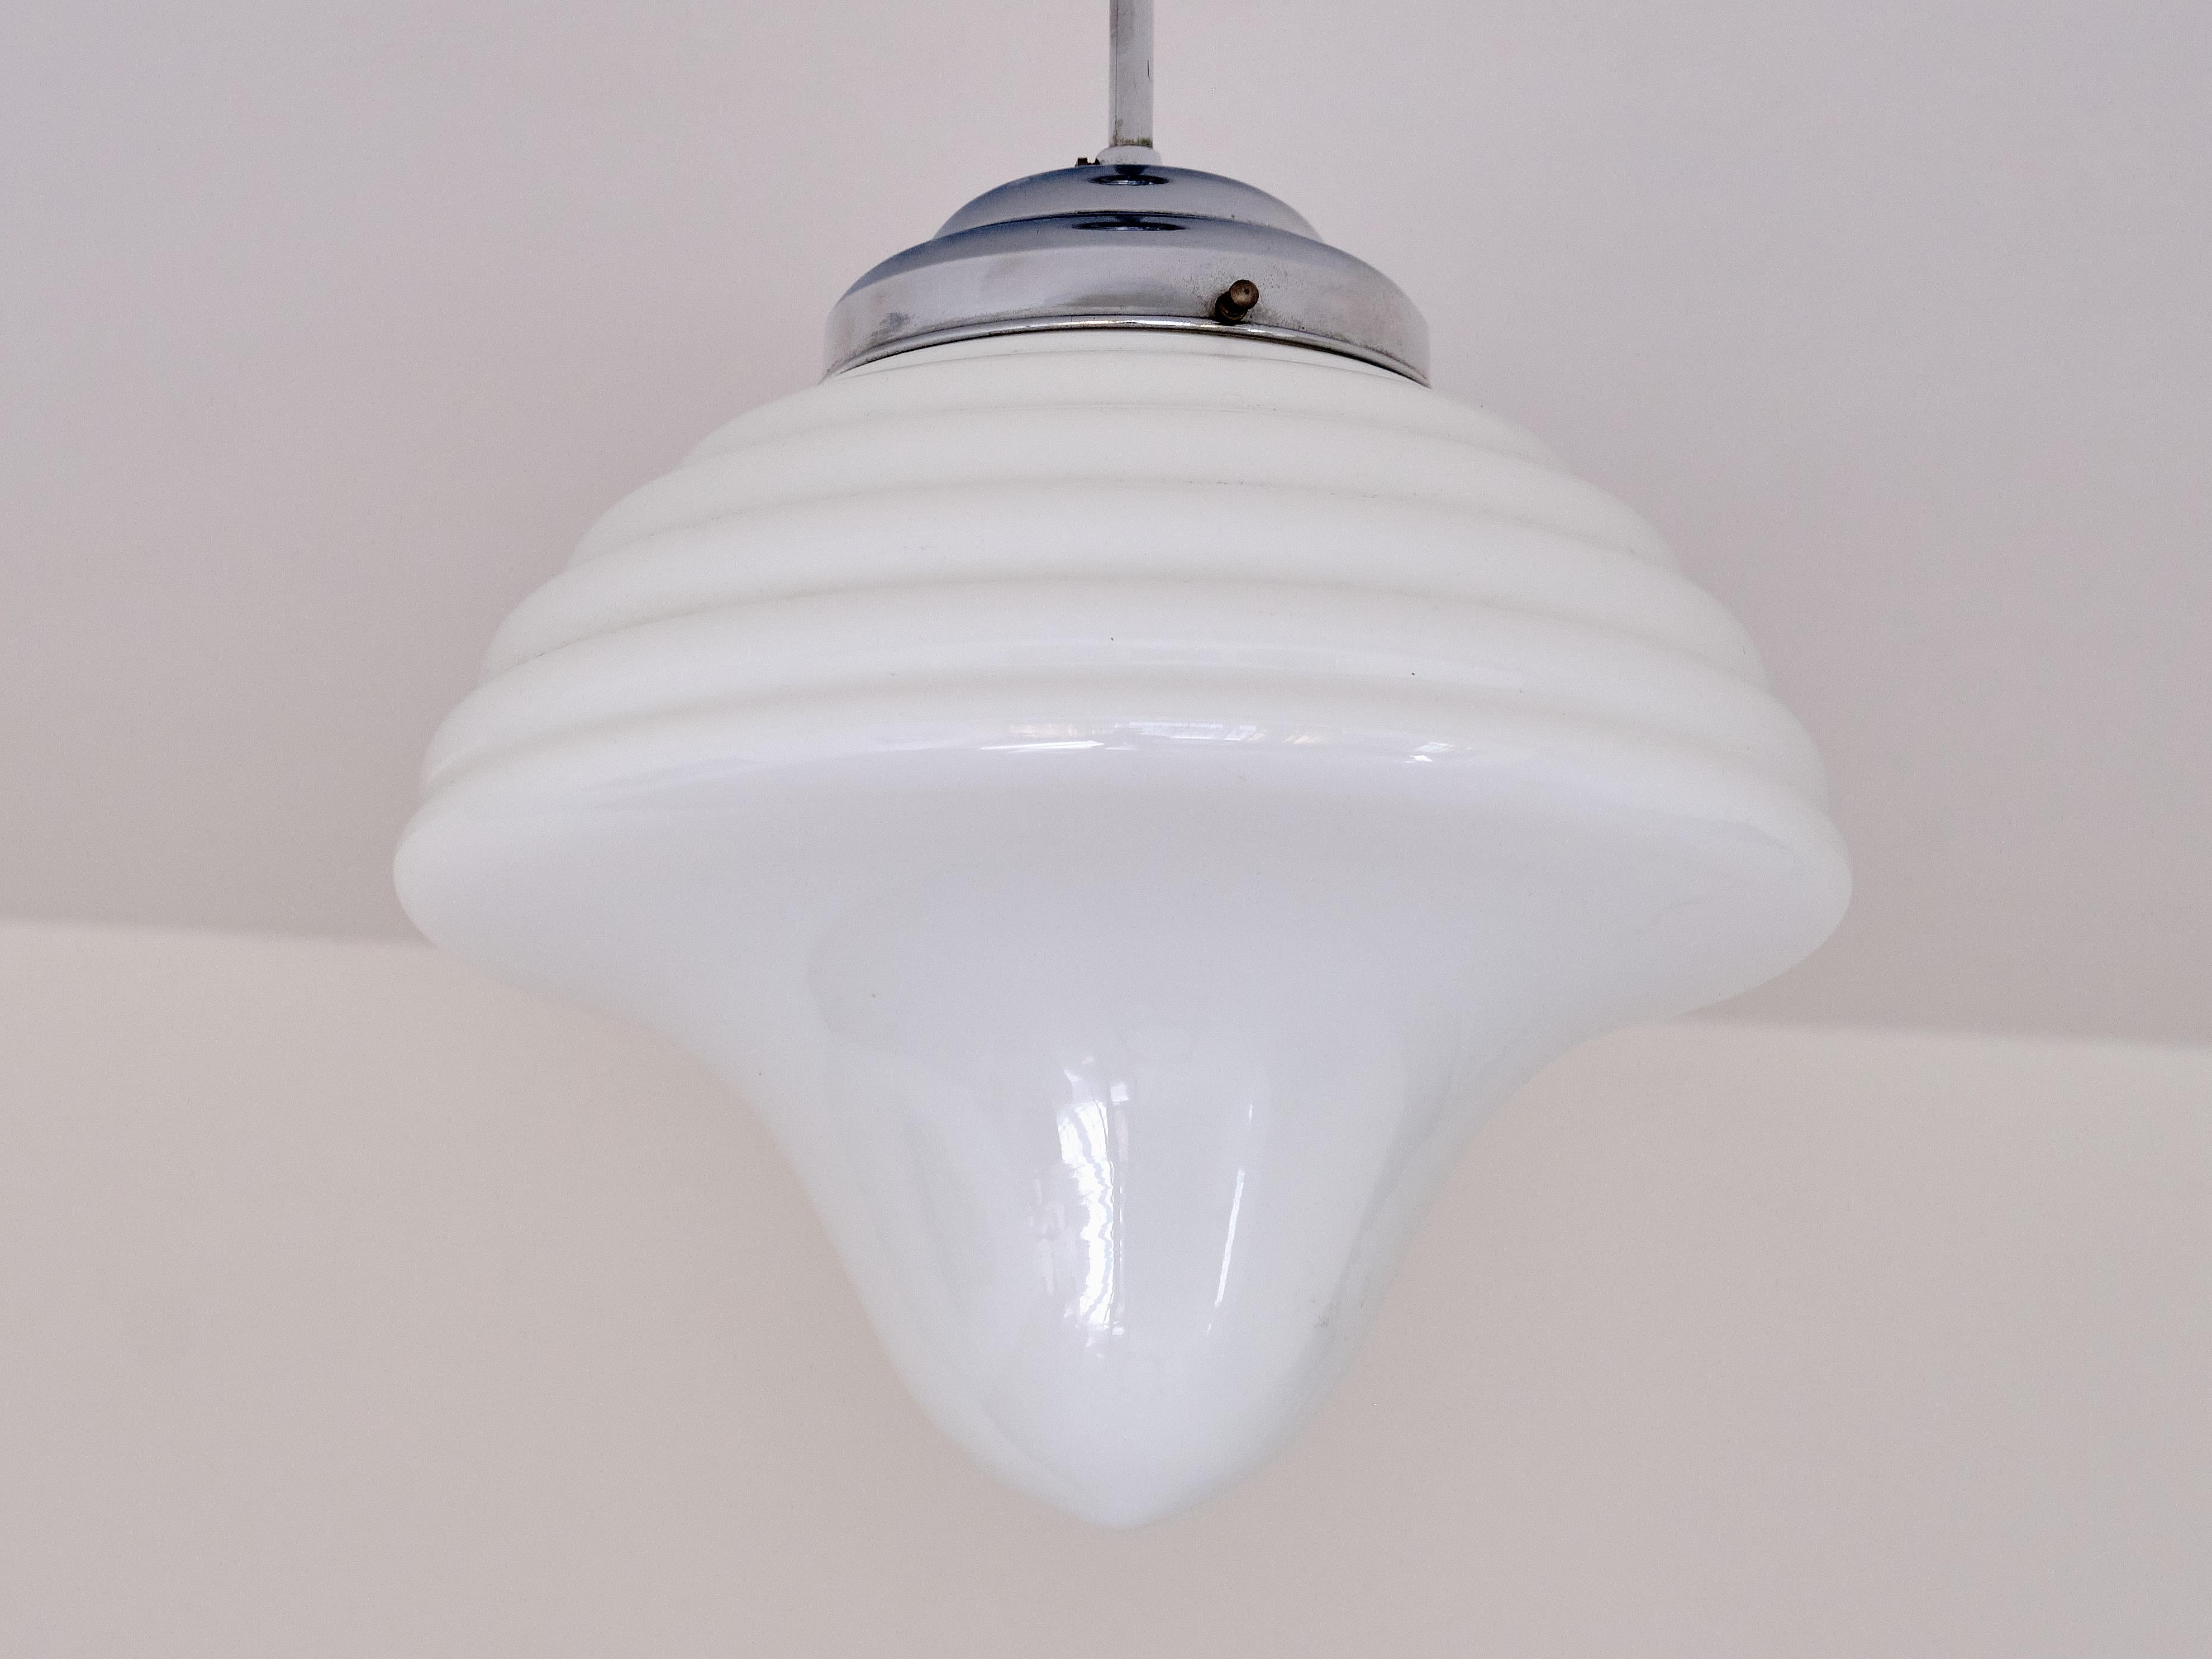 Mid-20th Century Art Deco Drop Shaped Pendant Light in Opal Glass and Nickel, Netherlands, 1930s For Sale